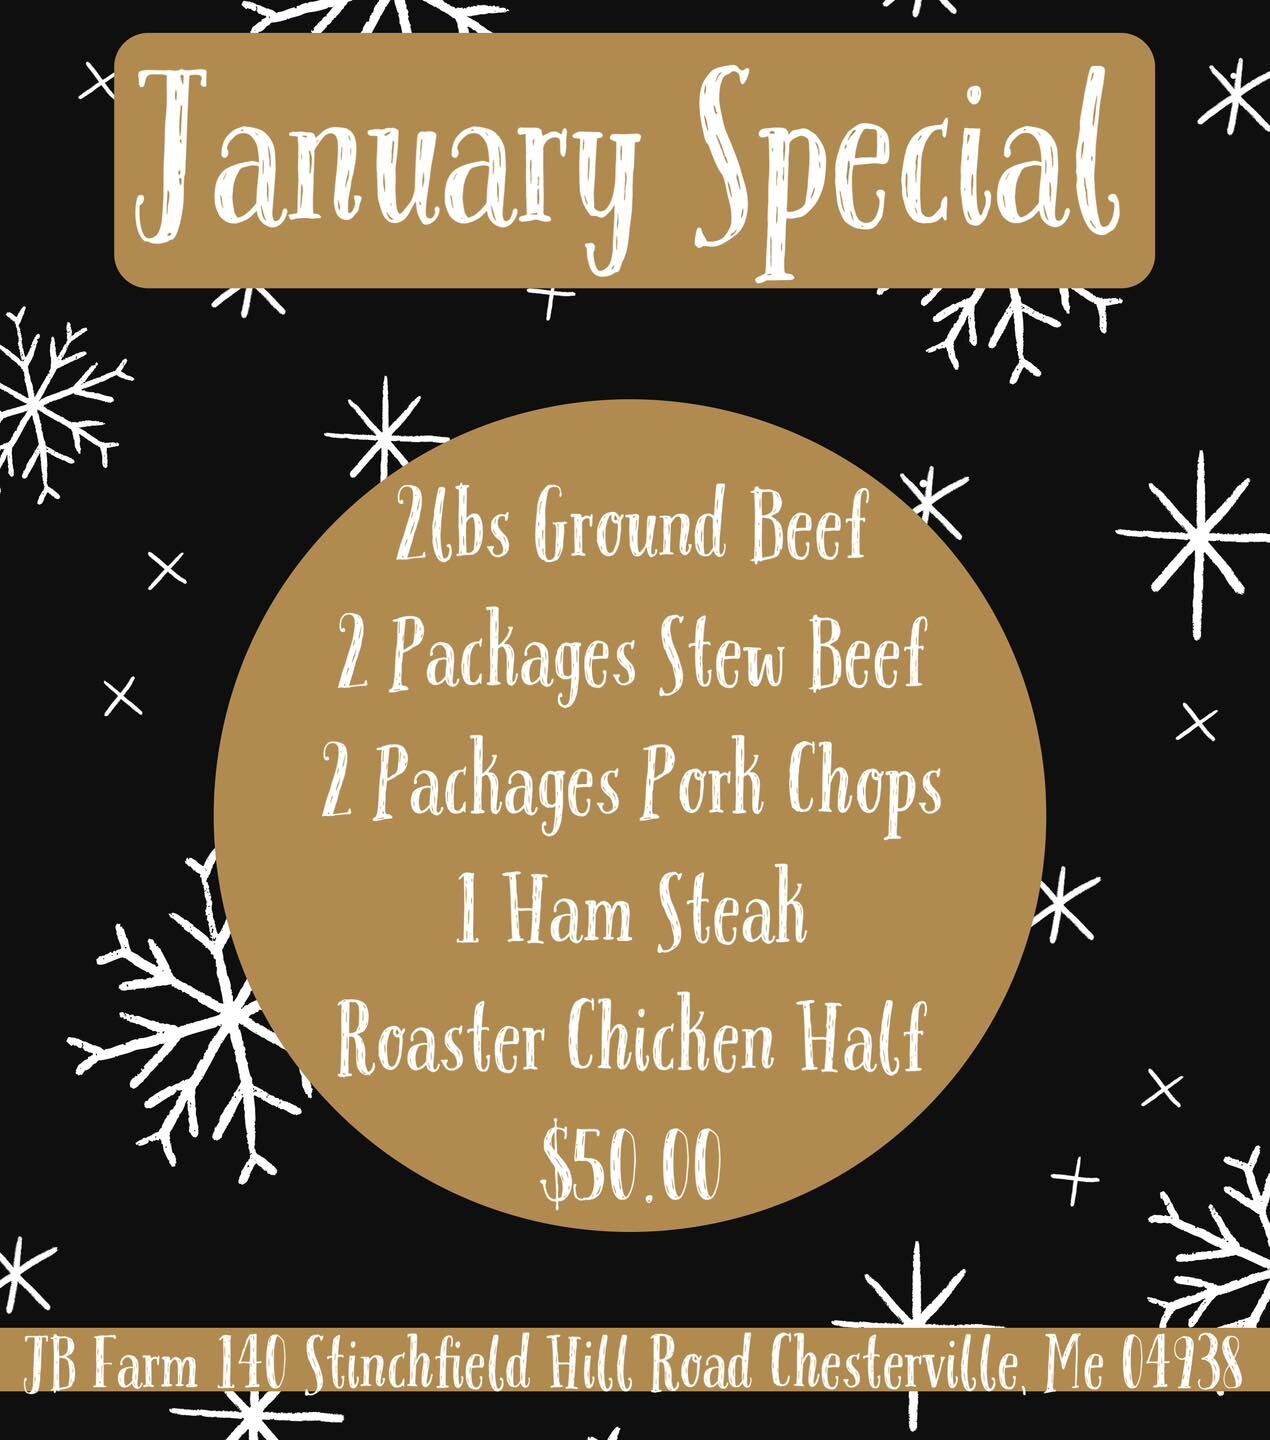 We&rsquo;re open today 8-1! 
Until we think of our February special how about 1 more chance to grab our January special! 
We&rsquo;ll be back next weekend with some new products and a new monthly special!